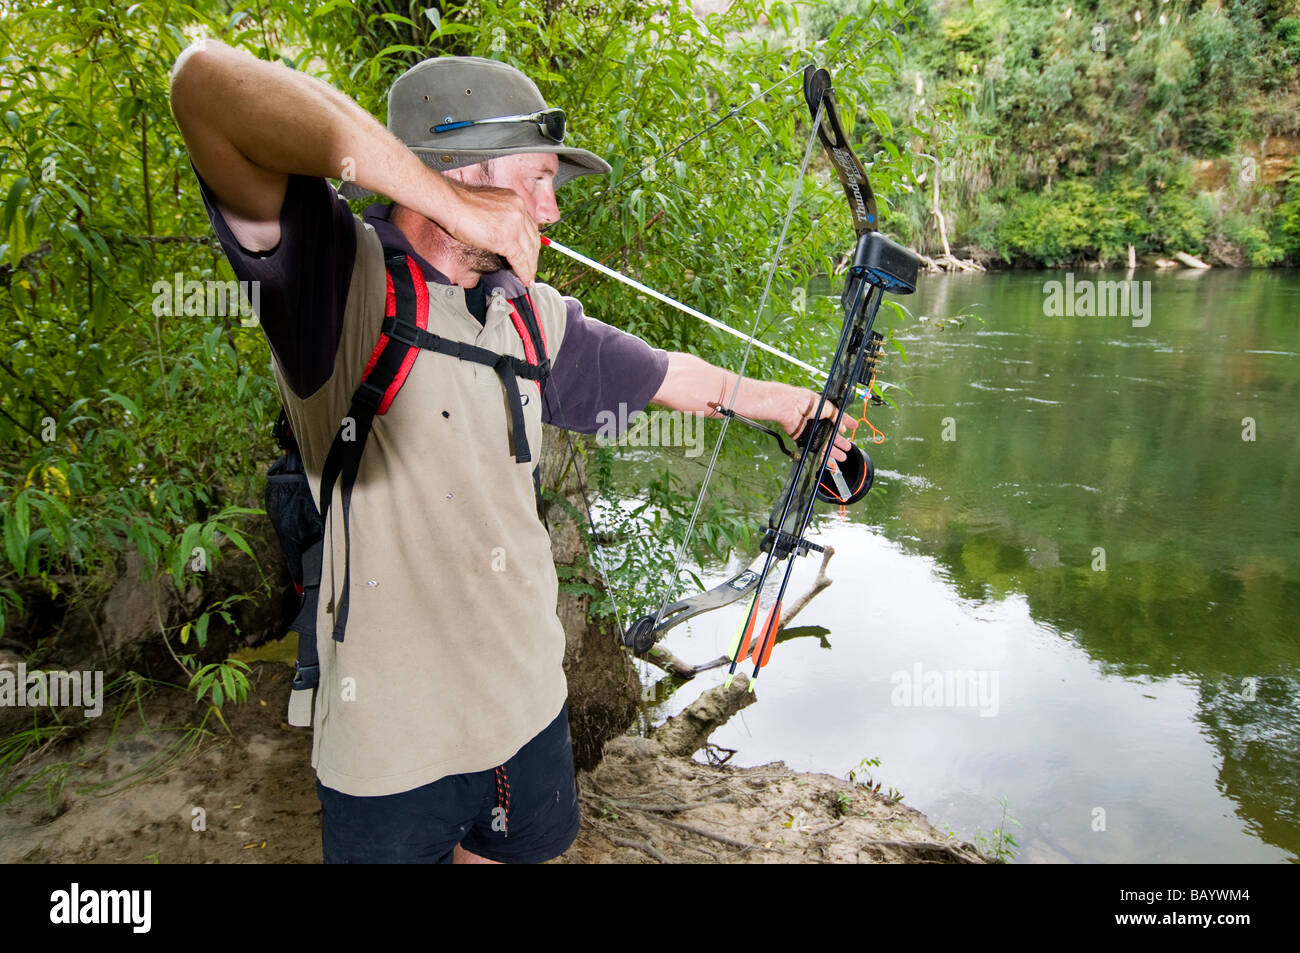 https://c8.alamy.com/comp/BAYWM4/man-hunting-fish-with-bow-and-arrow-attached-to-string-BAYWM4.jpg